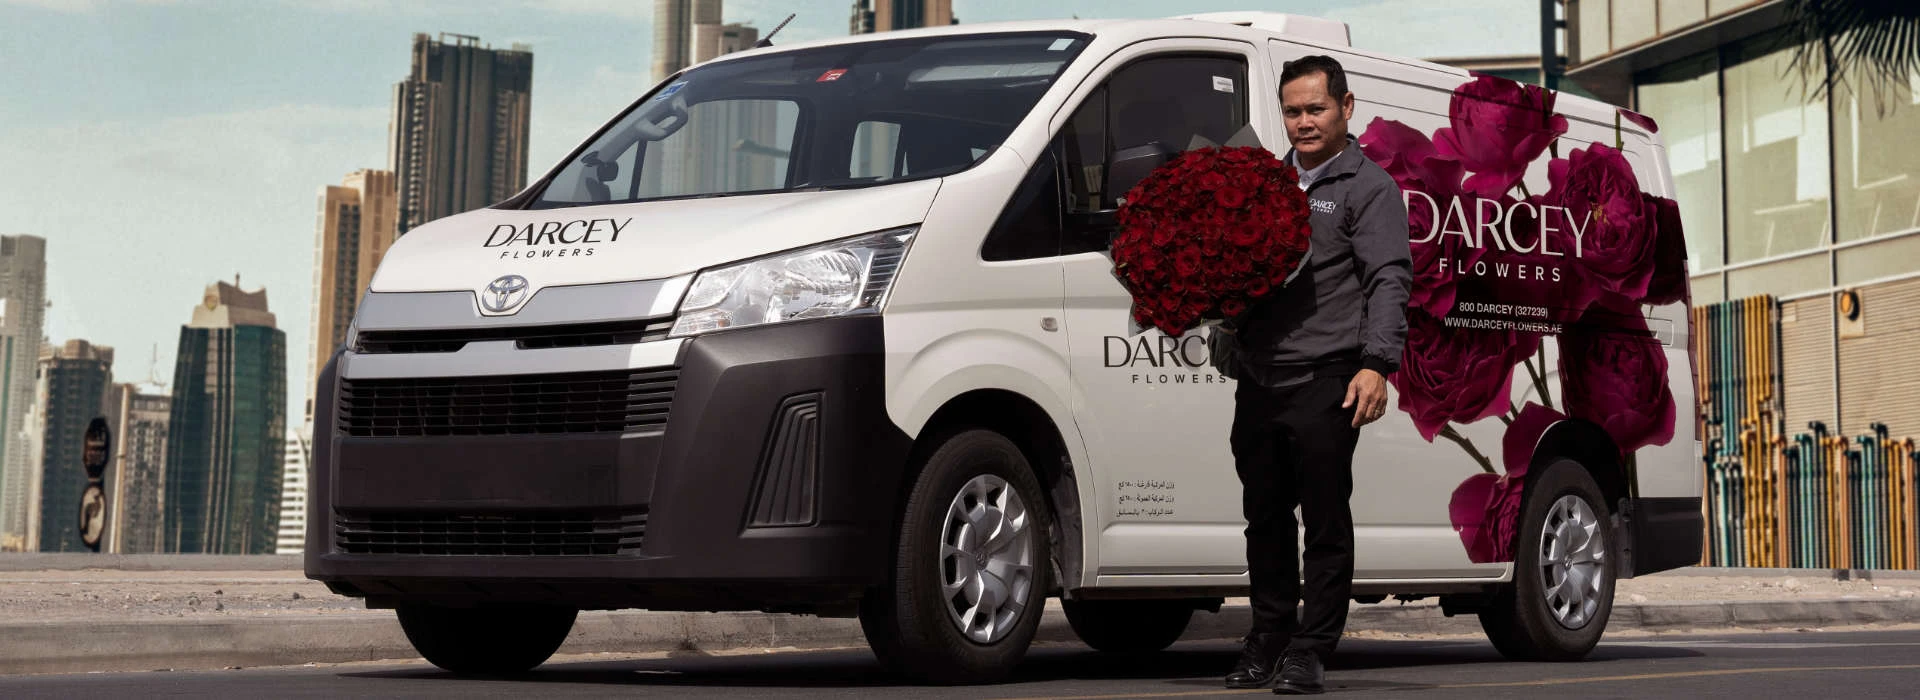 Flower delivery service Darcey Flowers